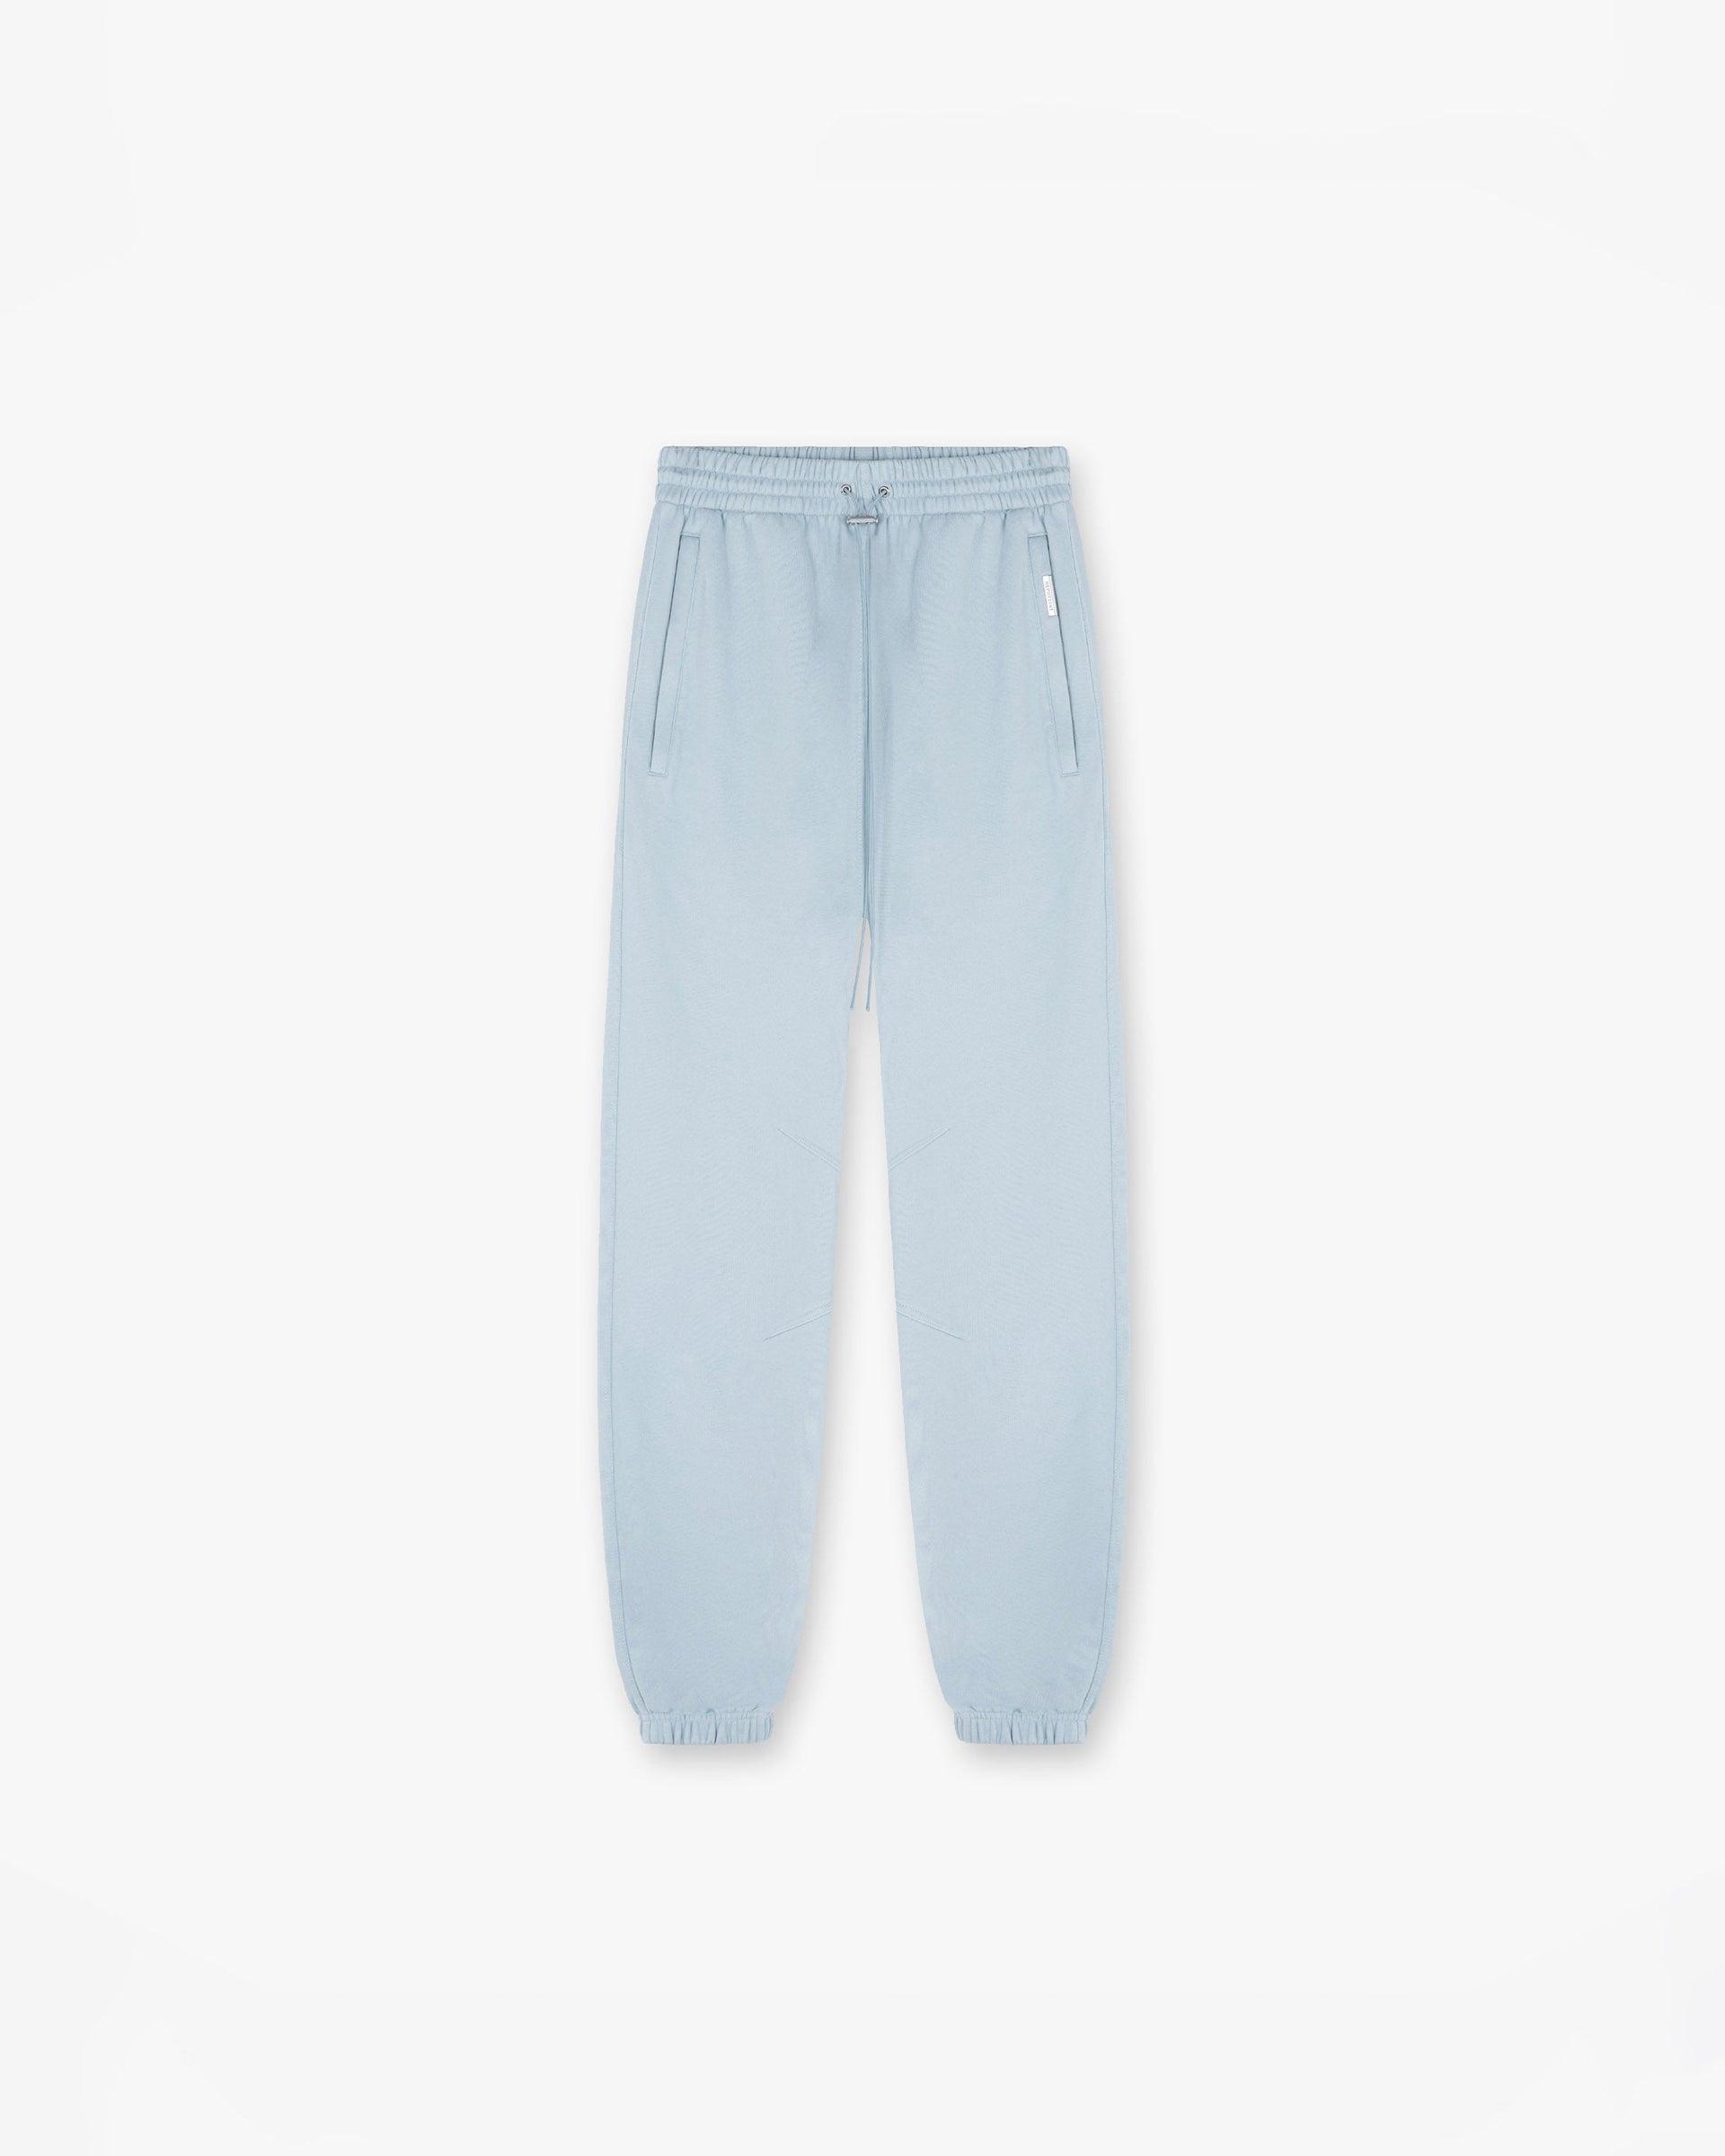 Blank Sweatpant | Washed Blue Pants BLANKS | Represent Clo